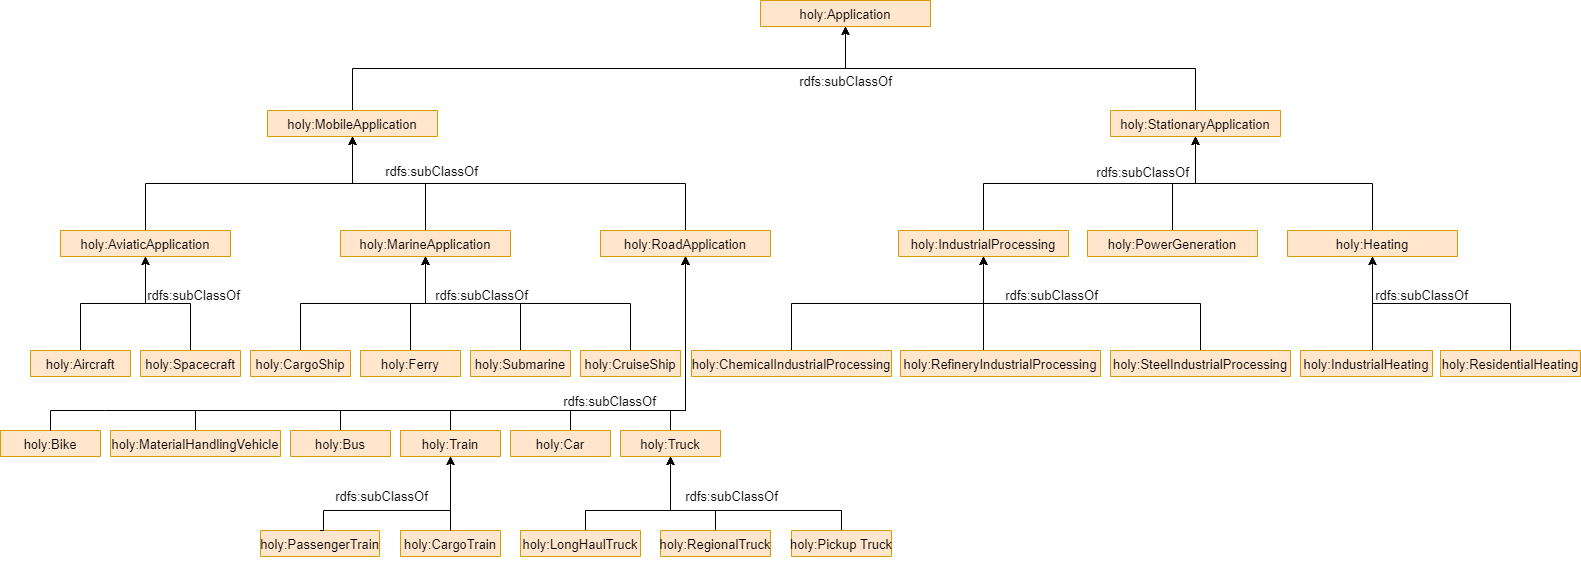 Taxonomy of holy:Application in HOLY